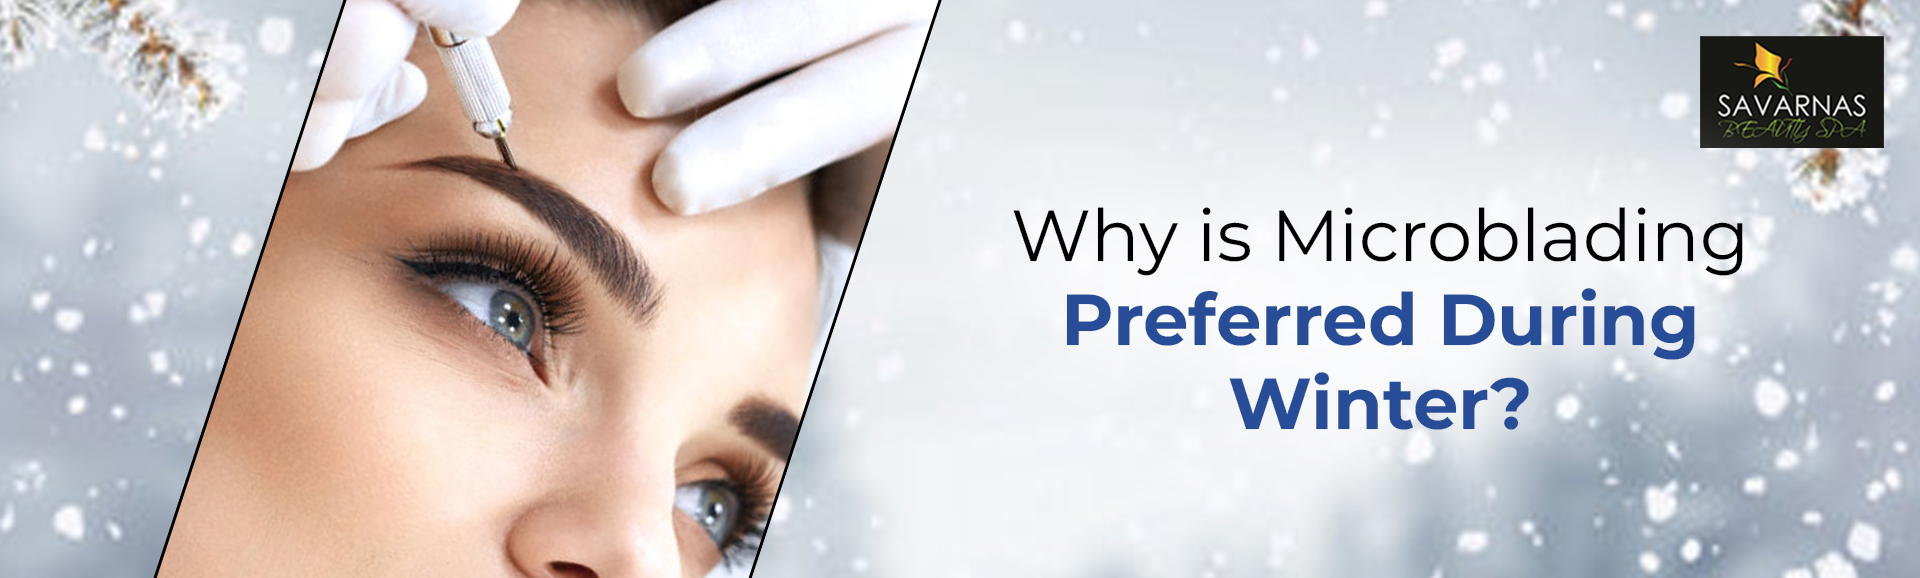 Why is Microblading Preferred During Winter